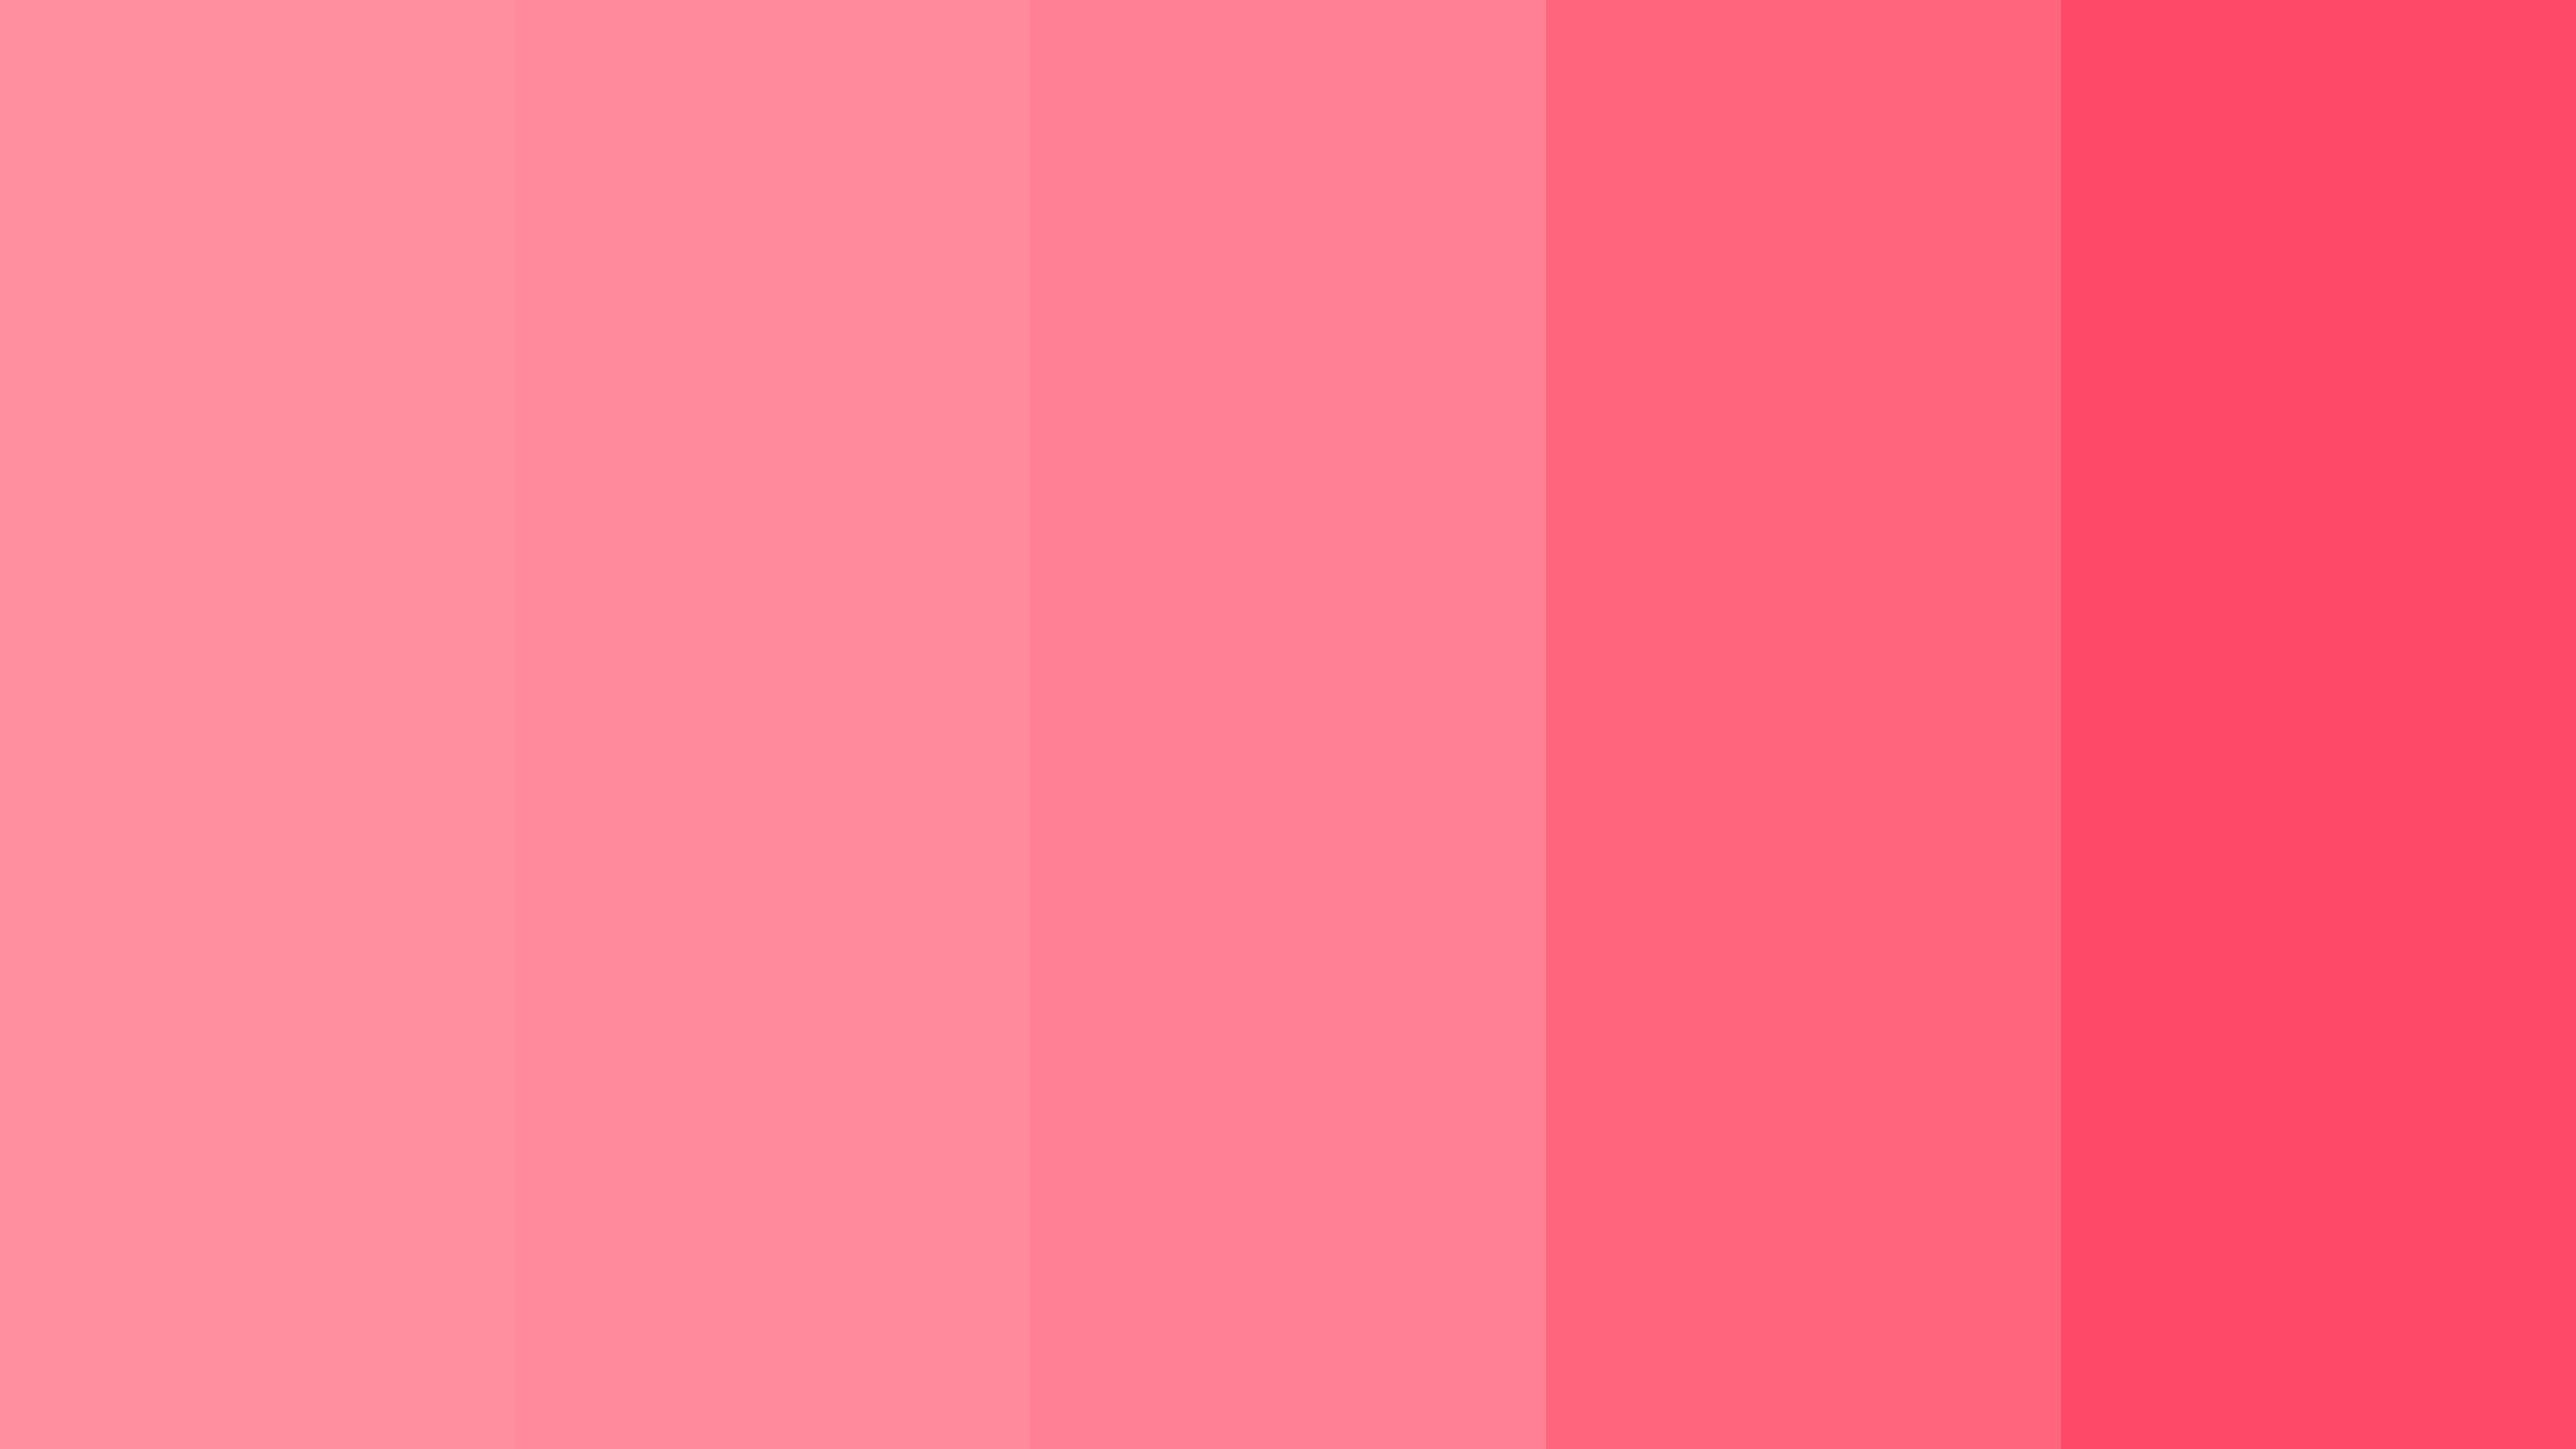 Color Palette With Five Shade Wild Watermelon Tickle Me Pink Pink Salmon  Pink Salmon Lavender Pink